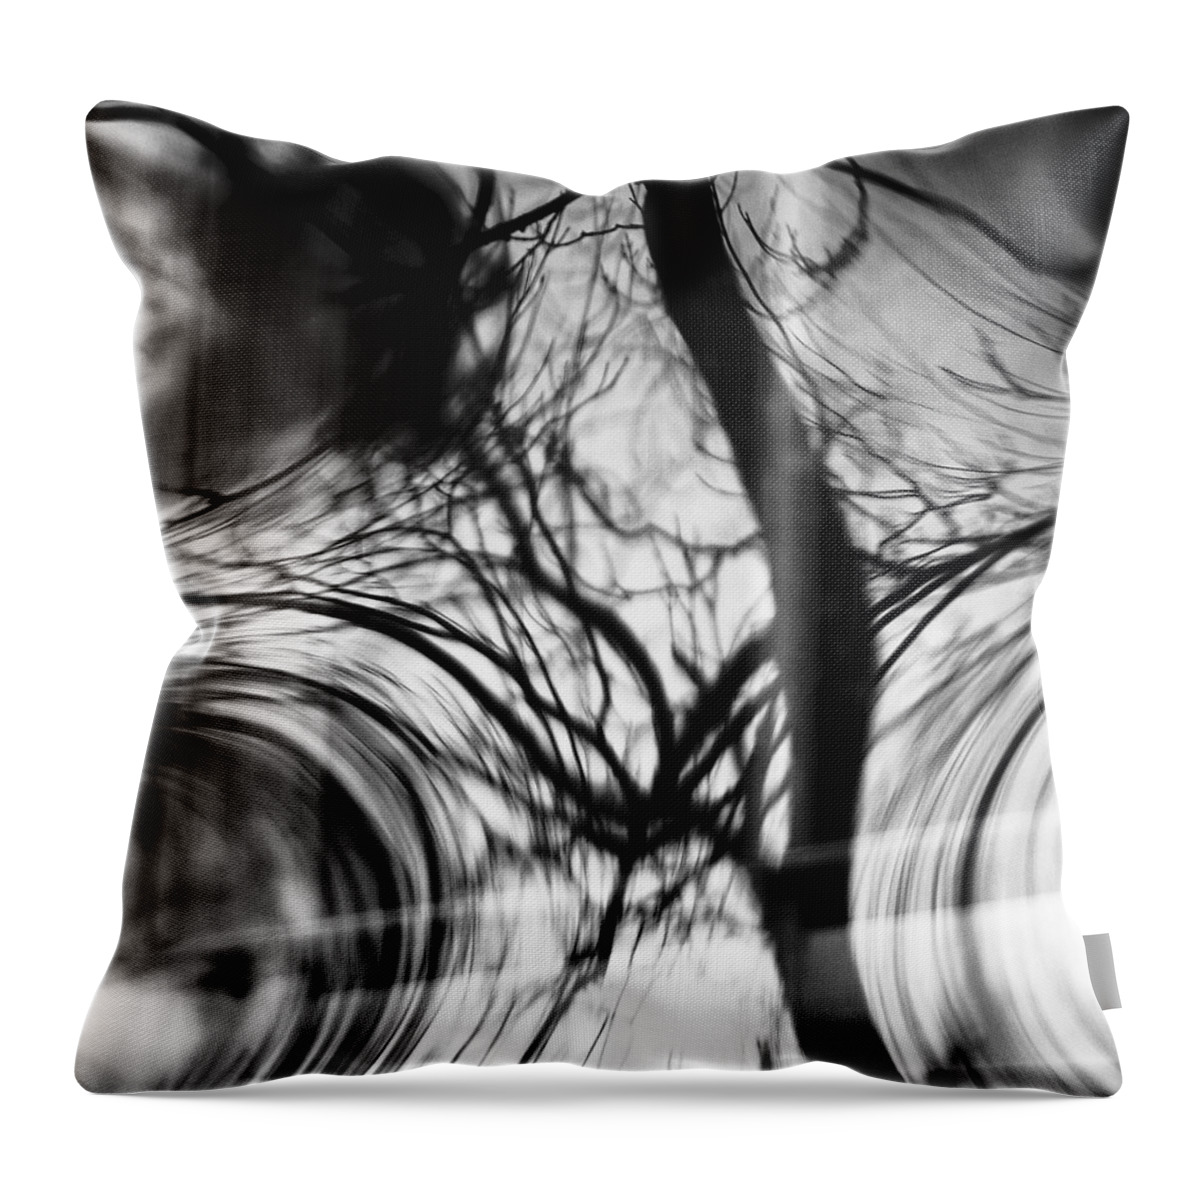 Abstracts Throw Pillow featuring the photograph Visual Funk 1 by Linda McRae